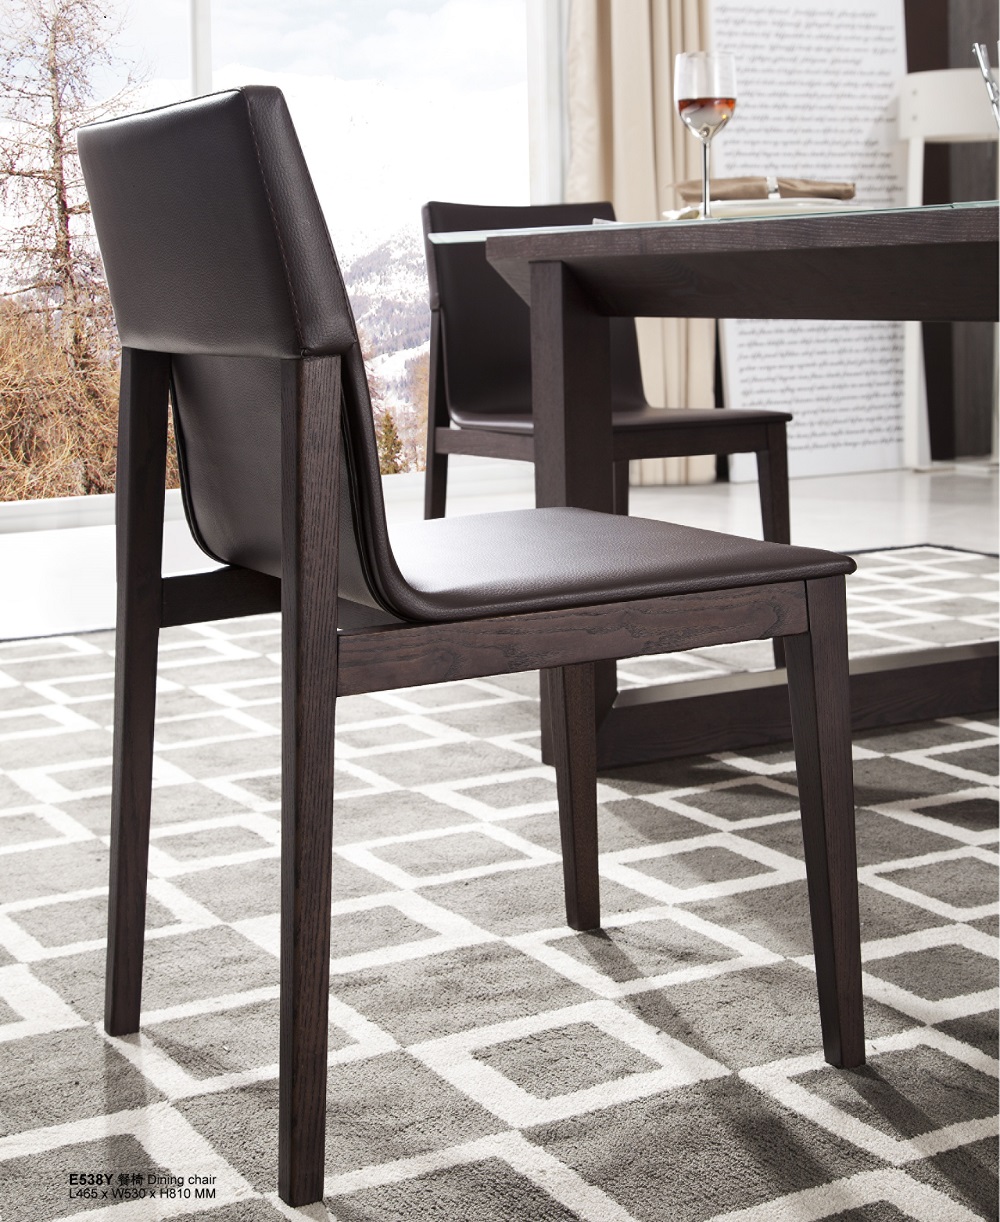 Contemporary Brown Upholstered Dining Chair with Sturdy Wooden Frame